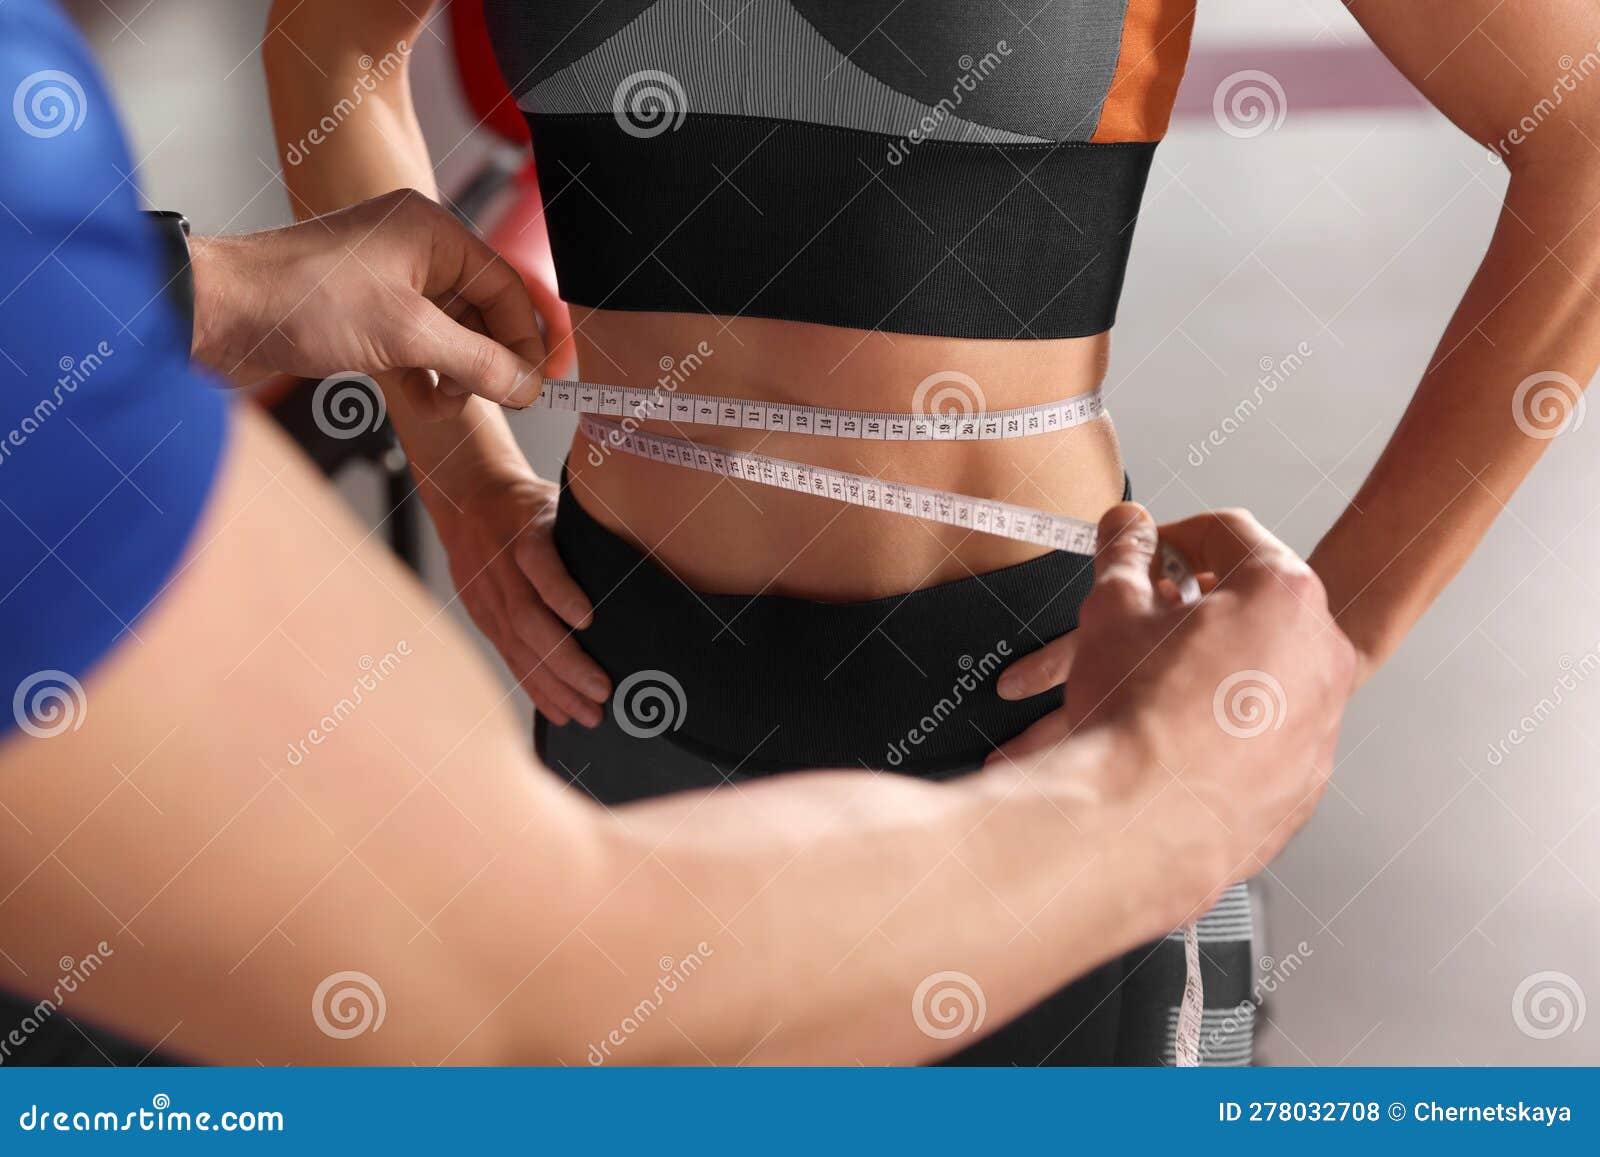 trainer measuring woman`s waist with tape in gym, closeup